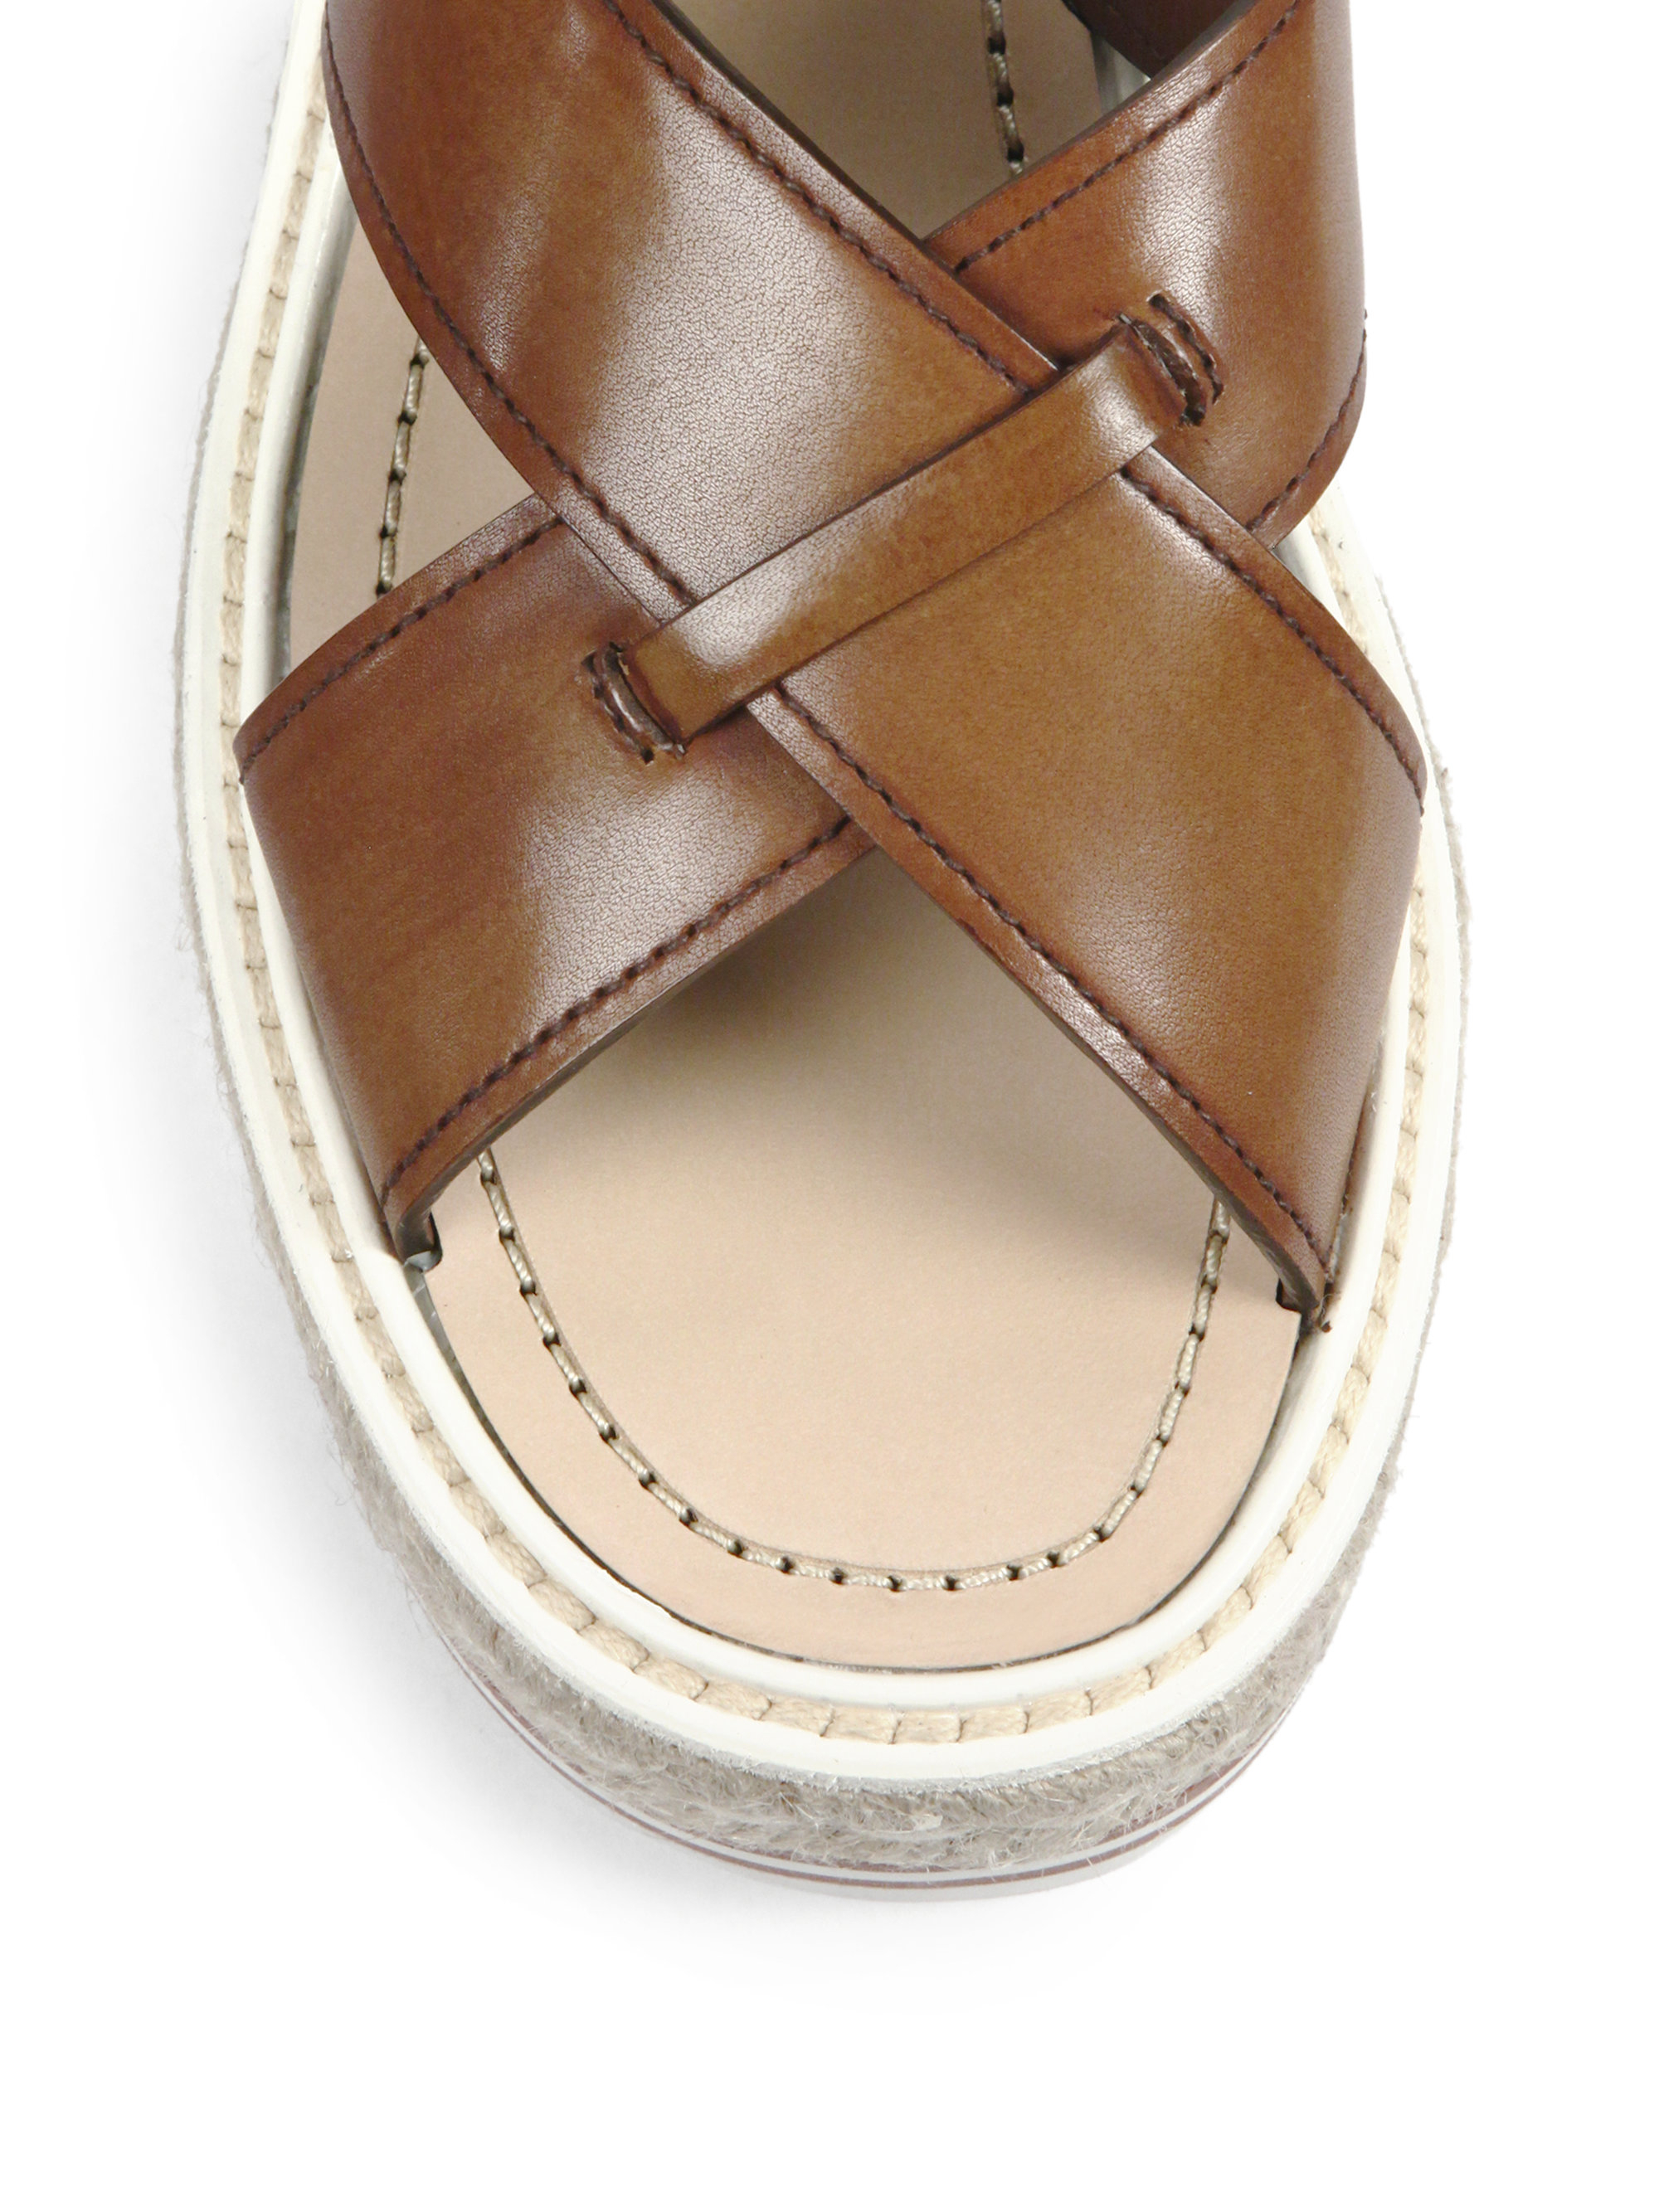 Prada Espadrille & Rubber-Sole Leather Sandals in Brown | Lyst